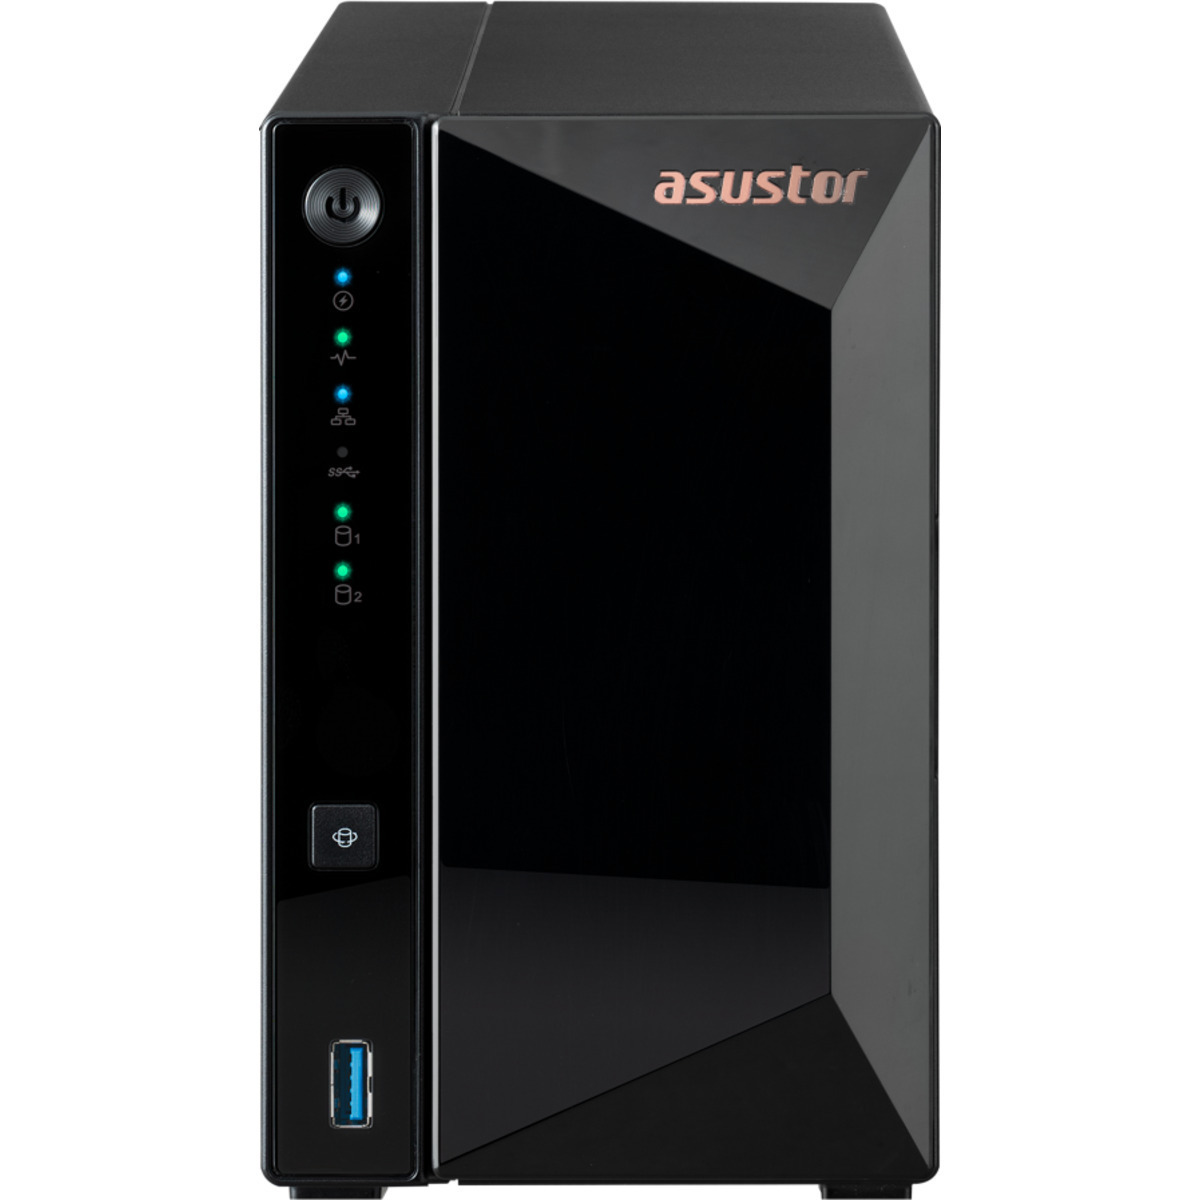 ASUSTOR DRIVESTOR 2 Pro Gen2 AS3302T v2 36tb 2-Bay Desktop Personal / Basic Home / Small Office NAS - Network Attached Storage Device 2x18tb Seagate IronWolf Pro ST18000NT001 3.5 7200rpm SATA 6Gb/s HDD NAS Class Drives Installed - Burn-In Tested - ON SALE DRIVESTOR 2 Pro Gen2 AS3302T v2